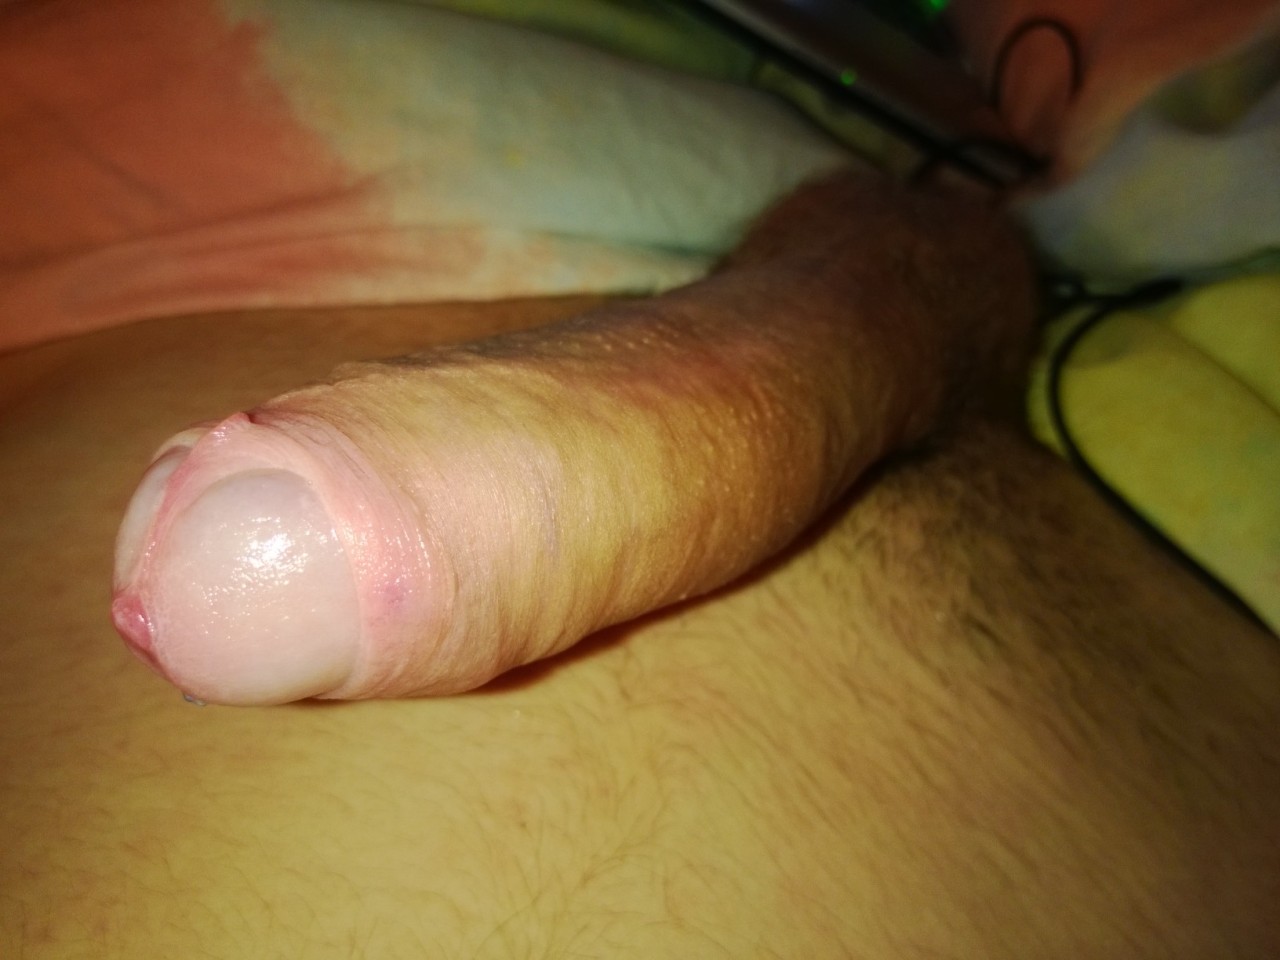 My dick ;) any chance i can see yours? email me and we can exchange more picsÂ 